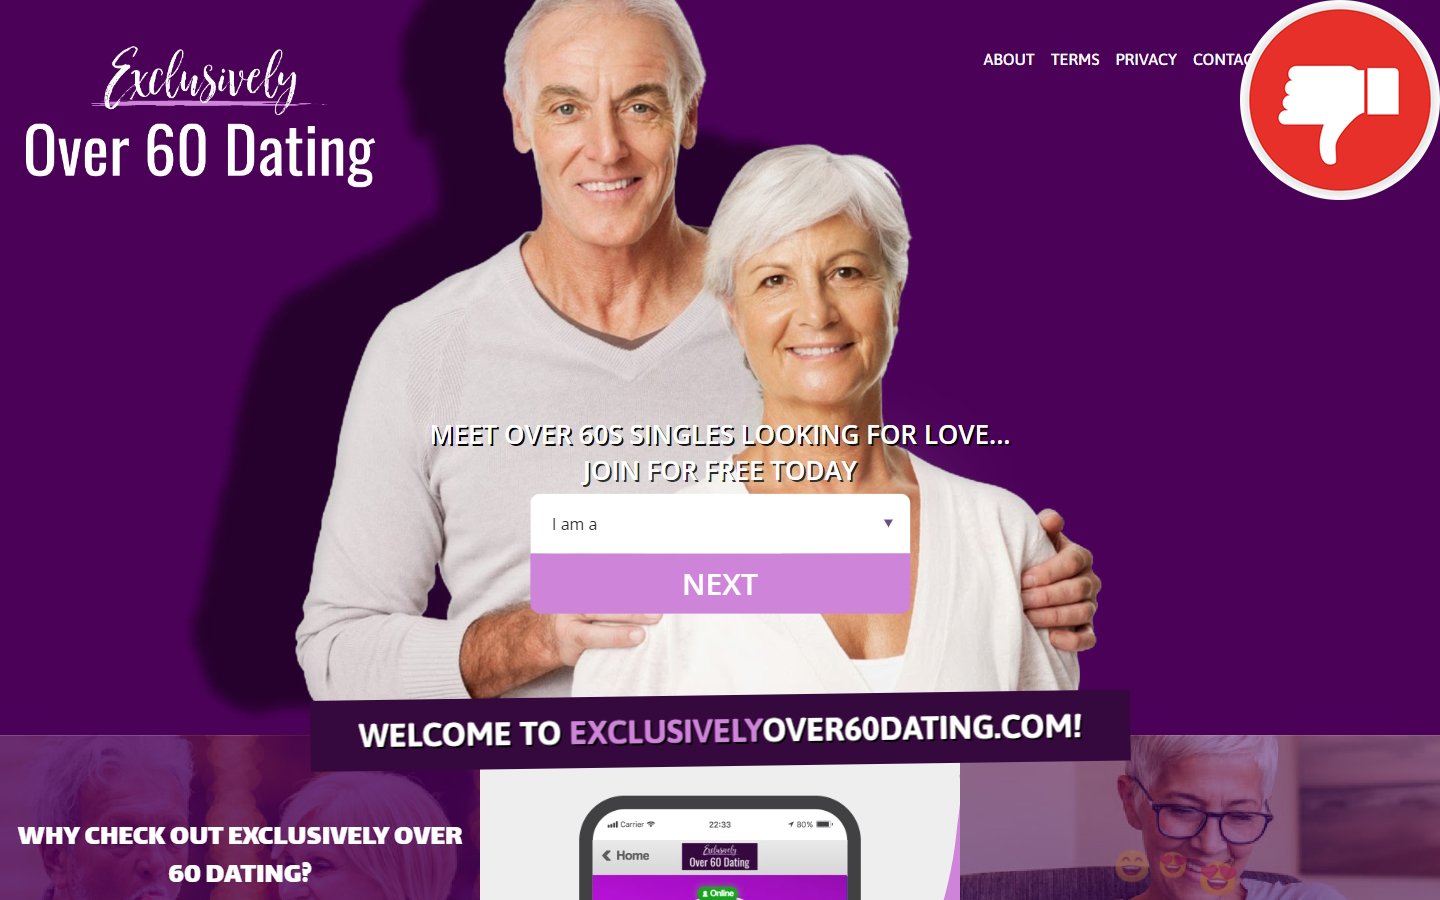 Review ExclusivelyOver60Dating.com Scam